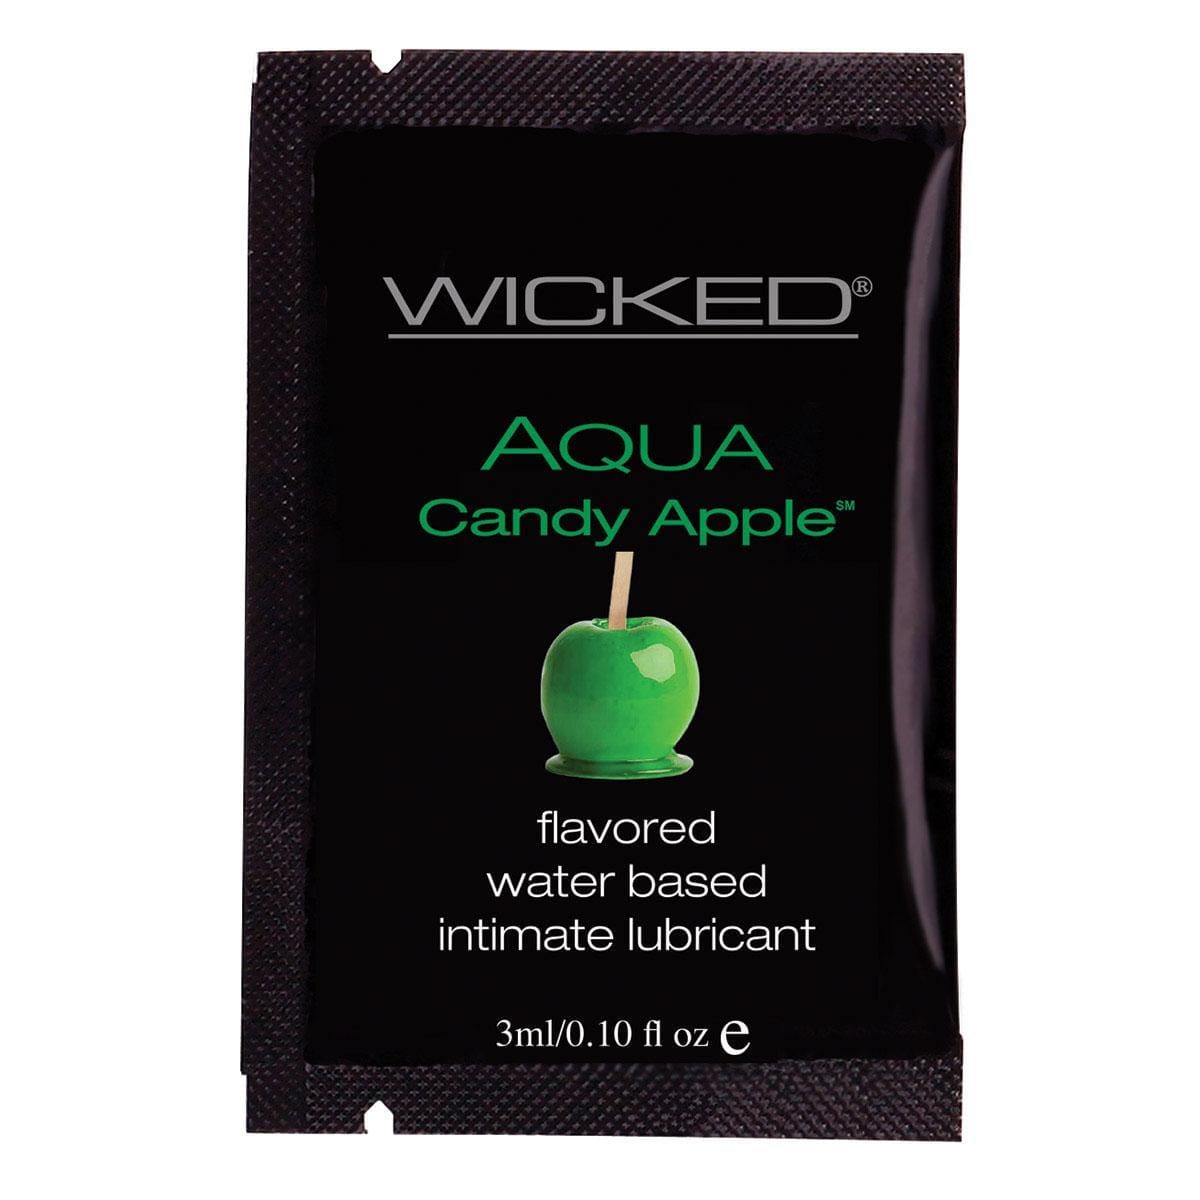 Wicked - Aqua Candy Apple Flavored Water Based Lubricant Sachet 3ml Lube (Water Based) 713079904000 CherryAffairs